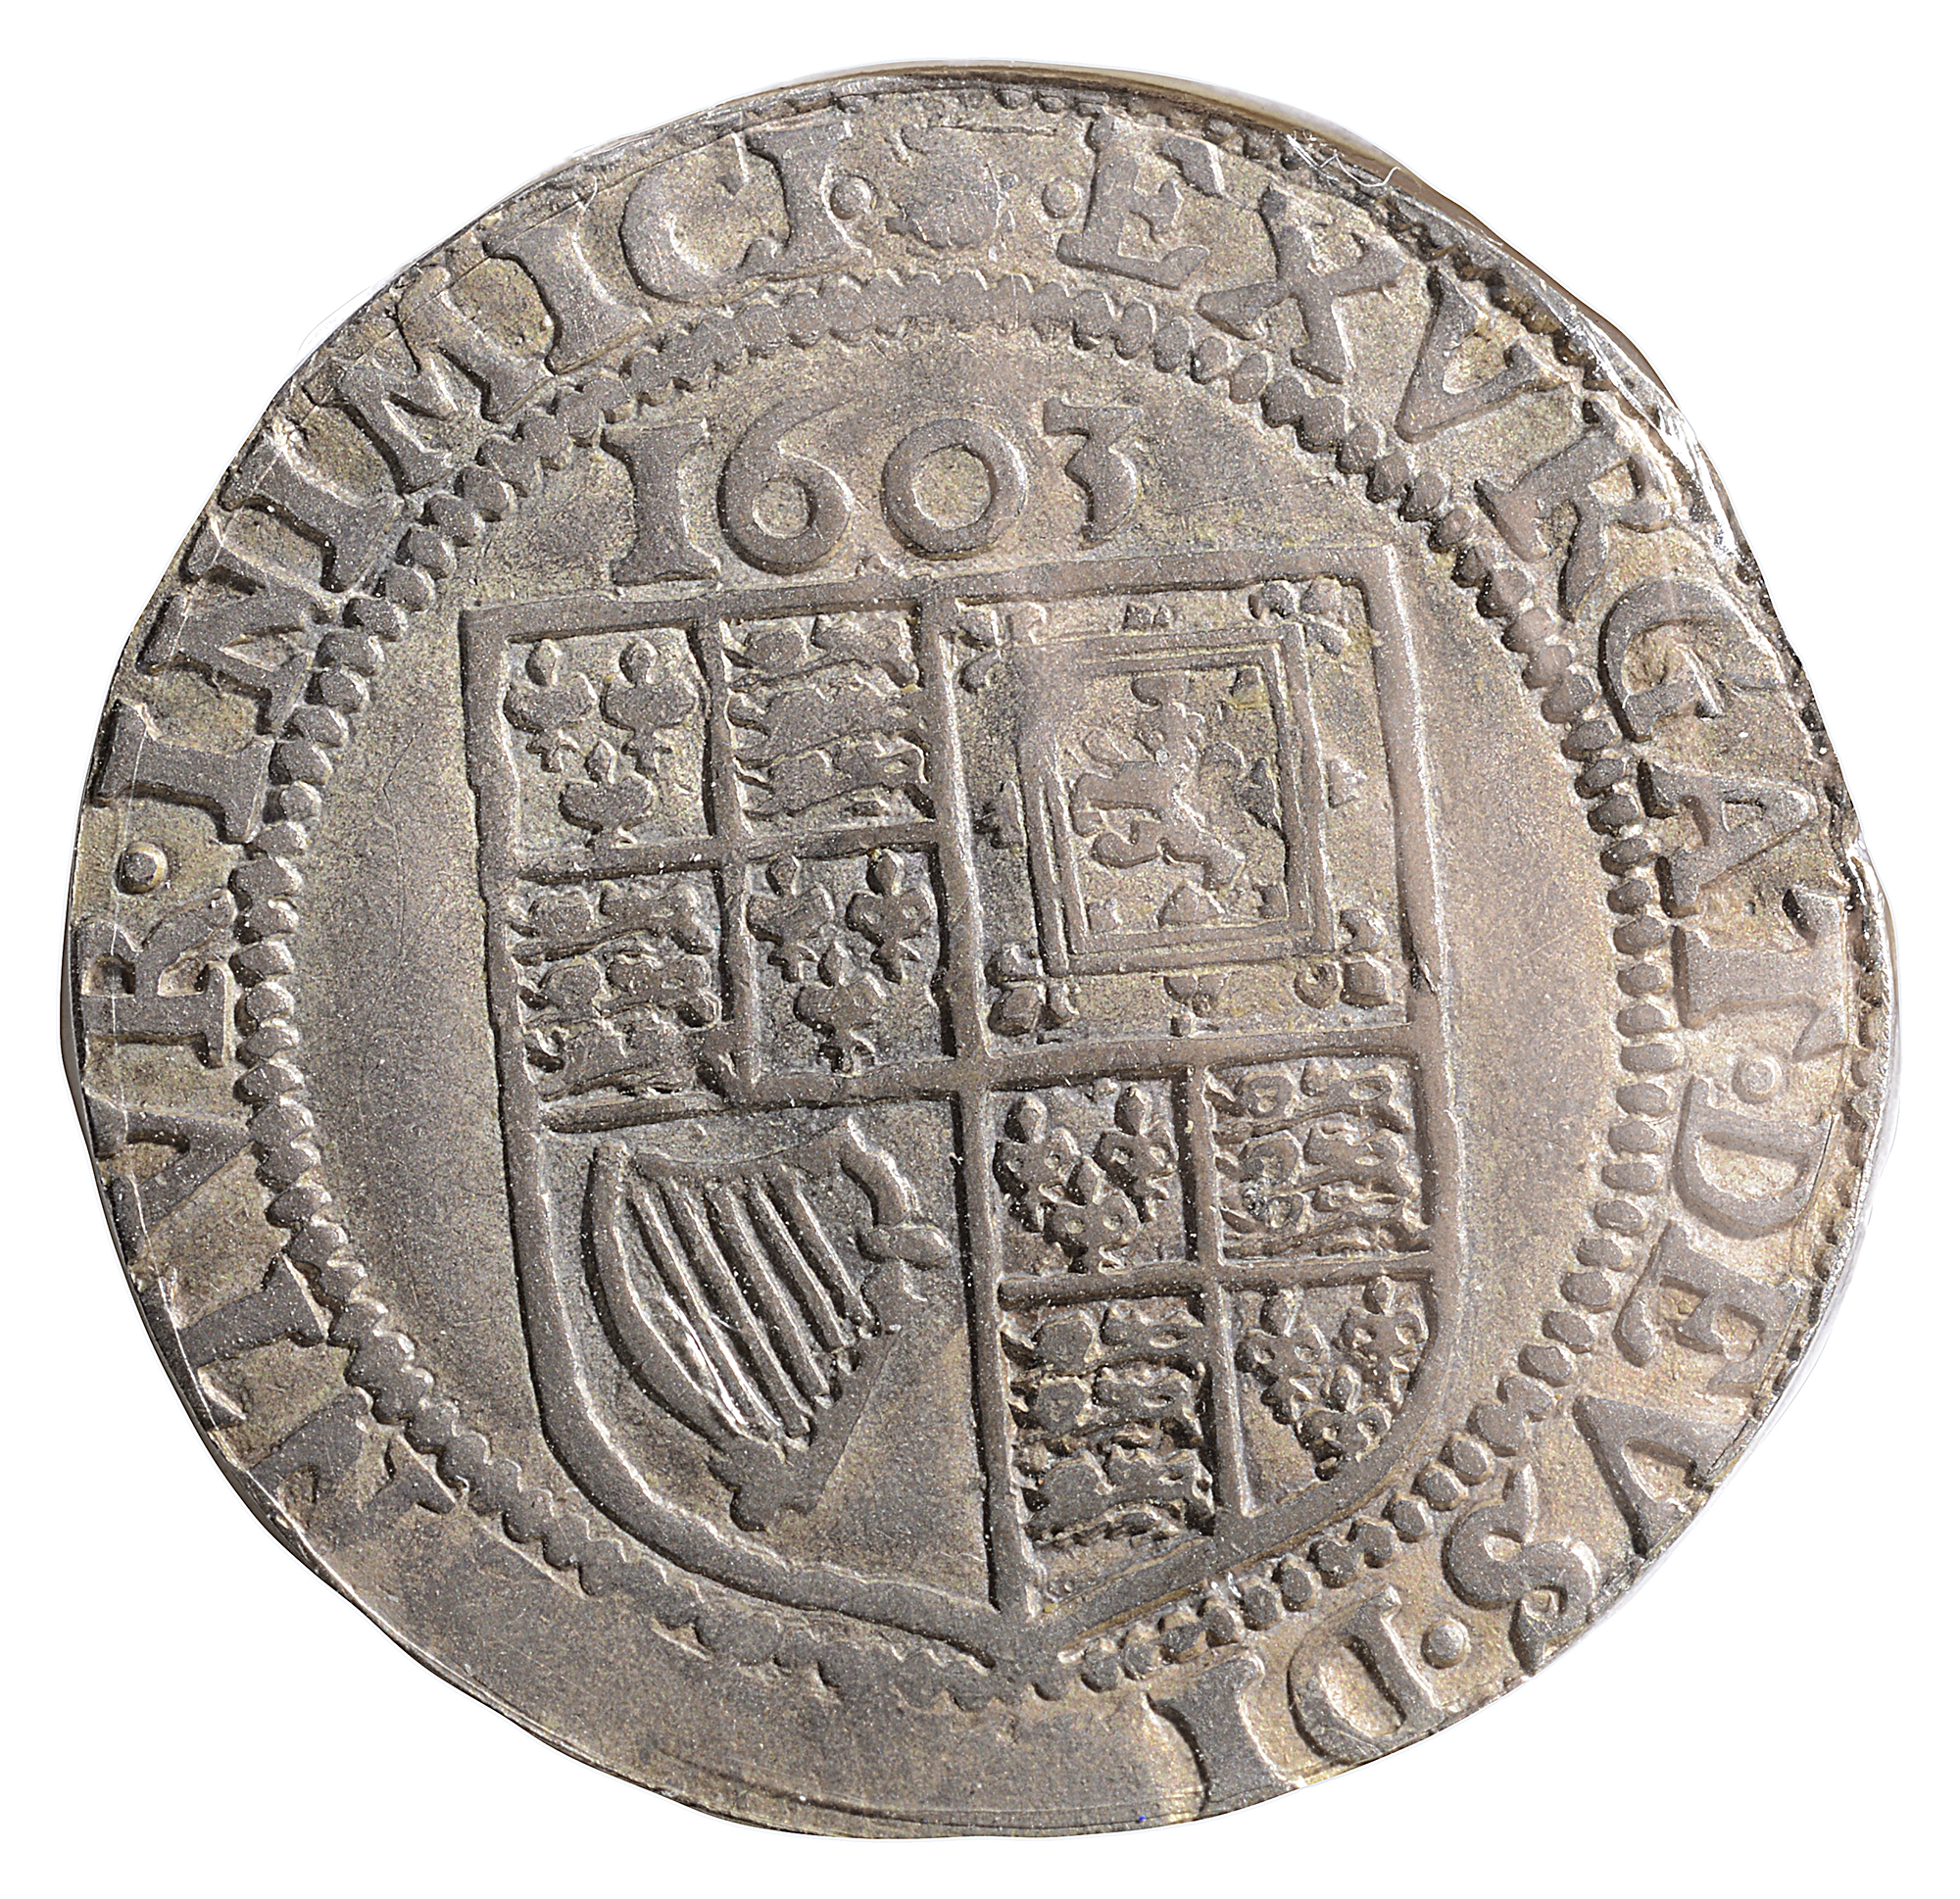 James I (1603-1625) silver sixpencefirst issue, mint mark thistle, IACOBVS D G ANG SCO FRA ET HIB - Image 2 of 2